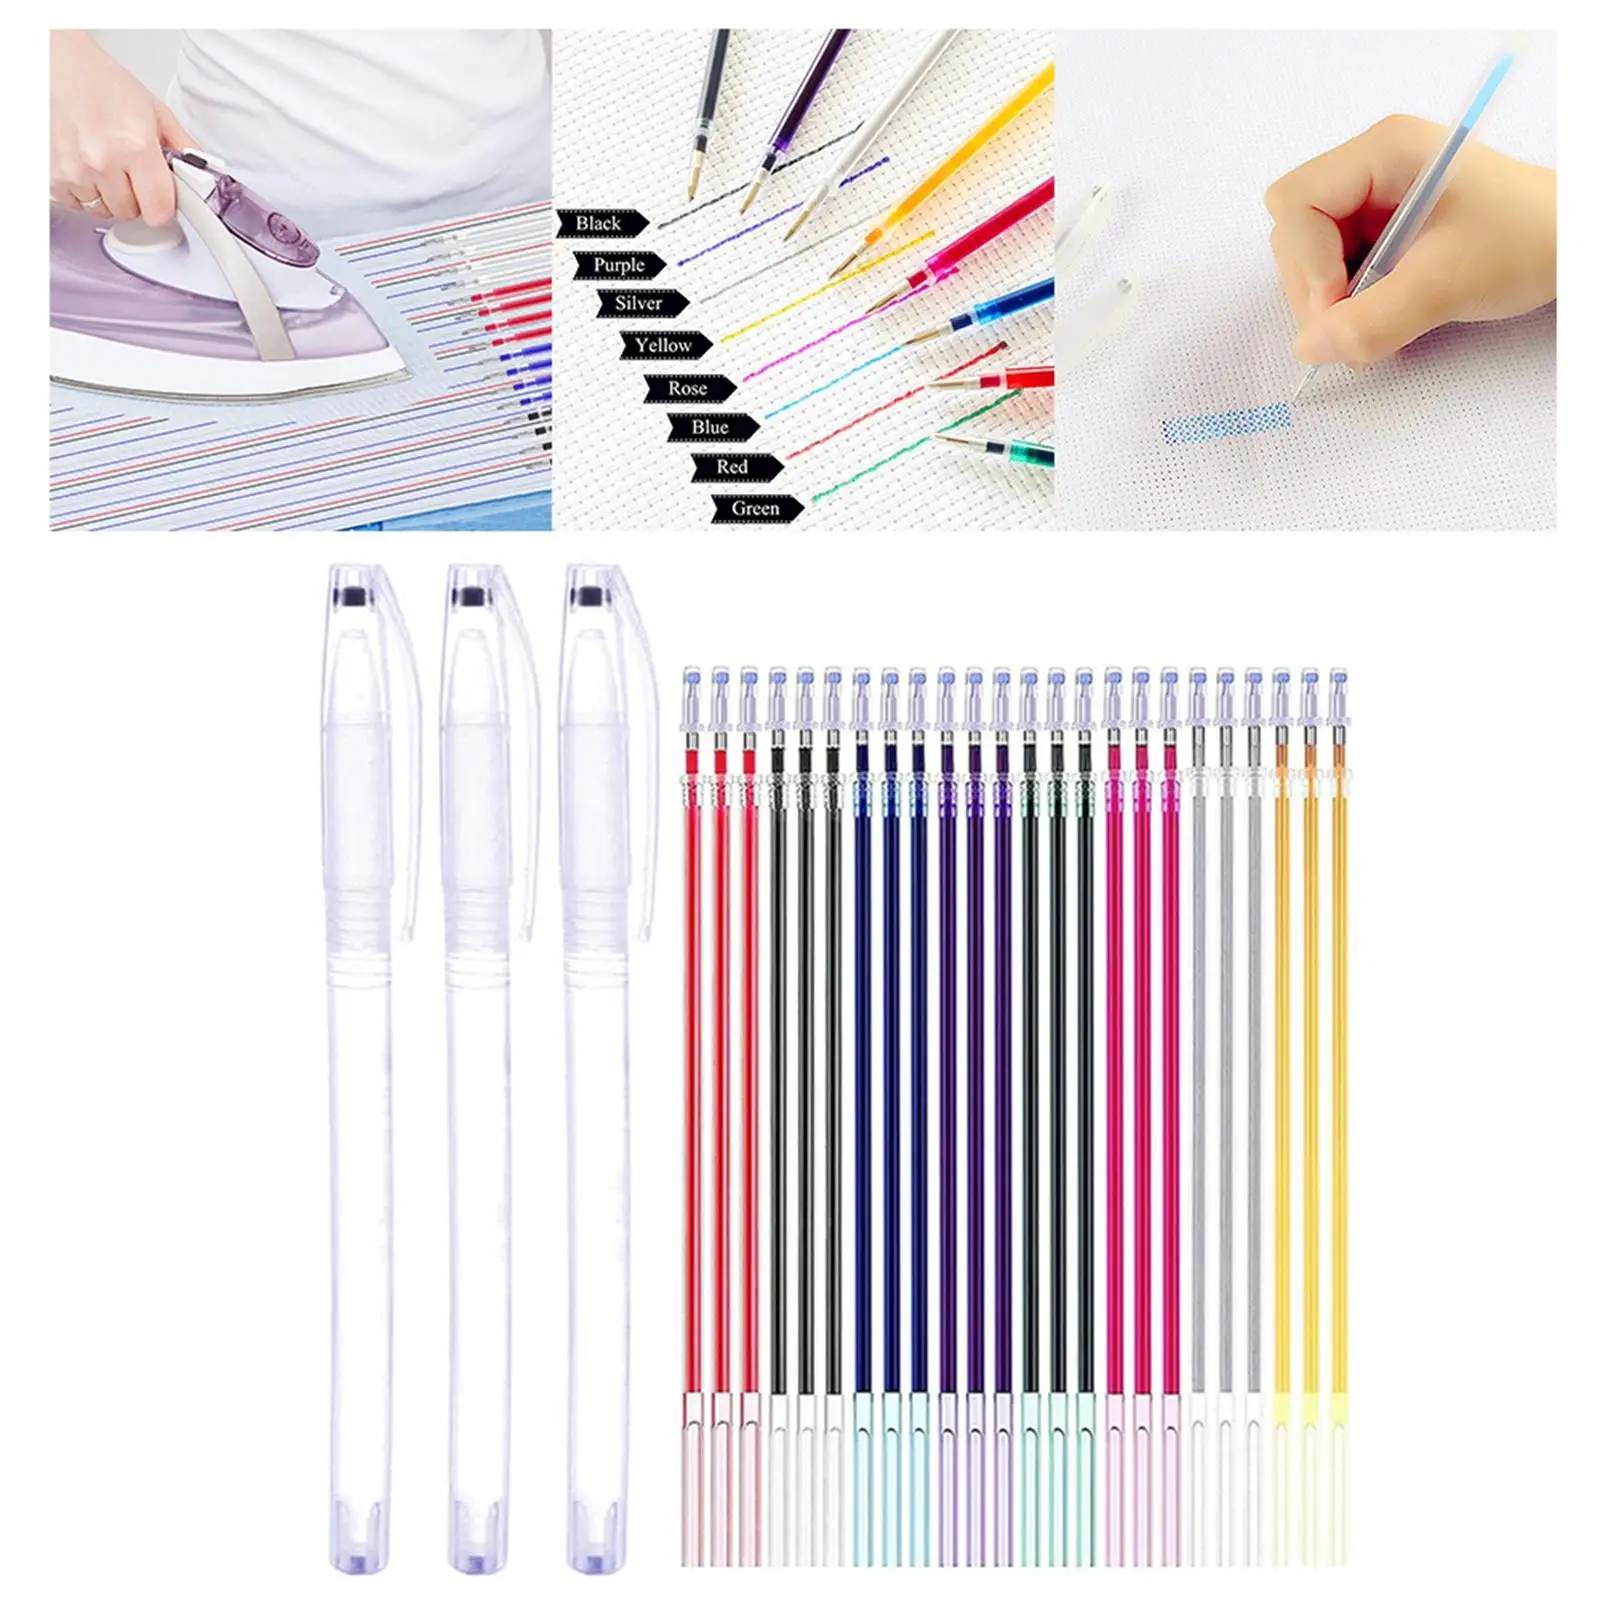 Portable Heat Erasable Pen Refills Fabric Marker DIY Replaceable Refills Vanishing for Tailors Quilting Embroidery Dressmaking